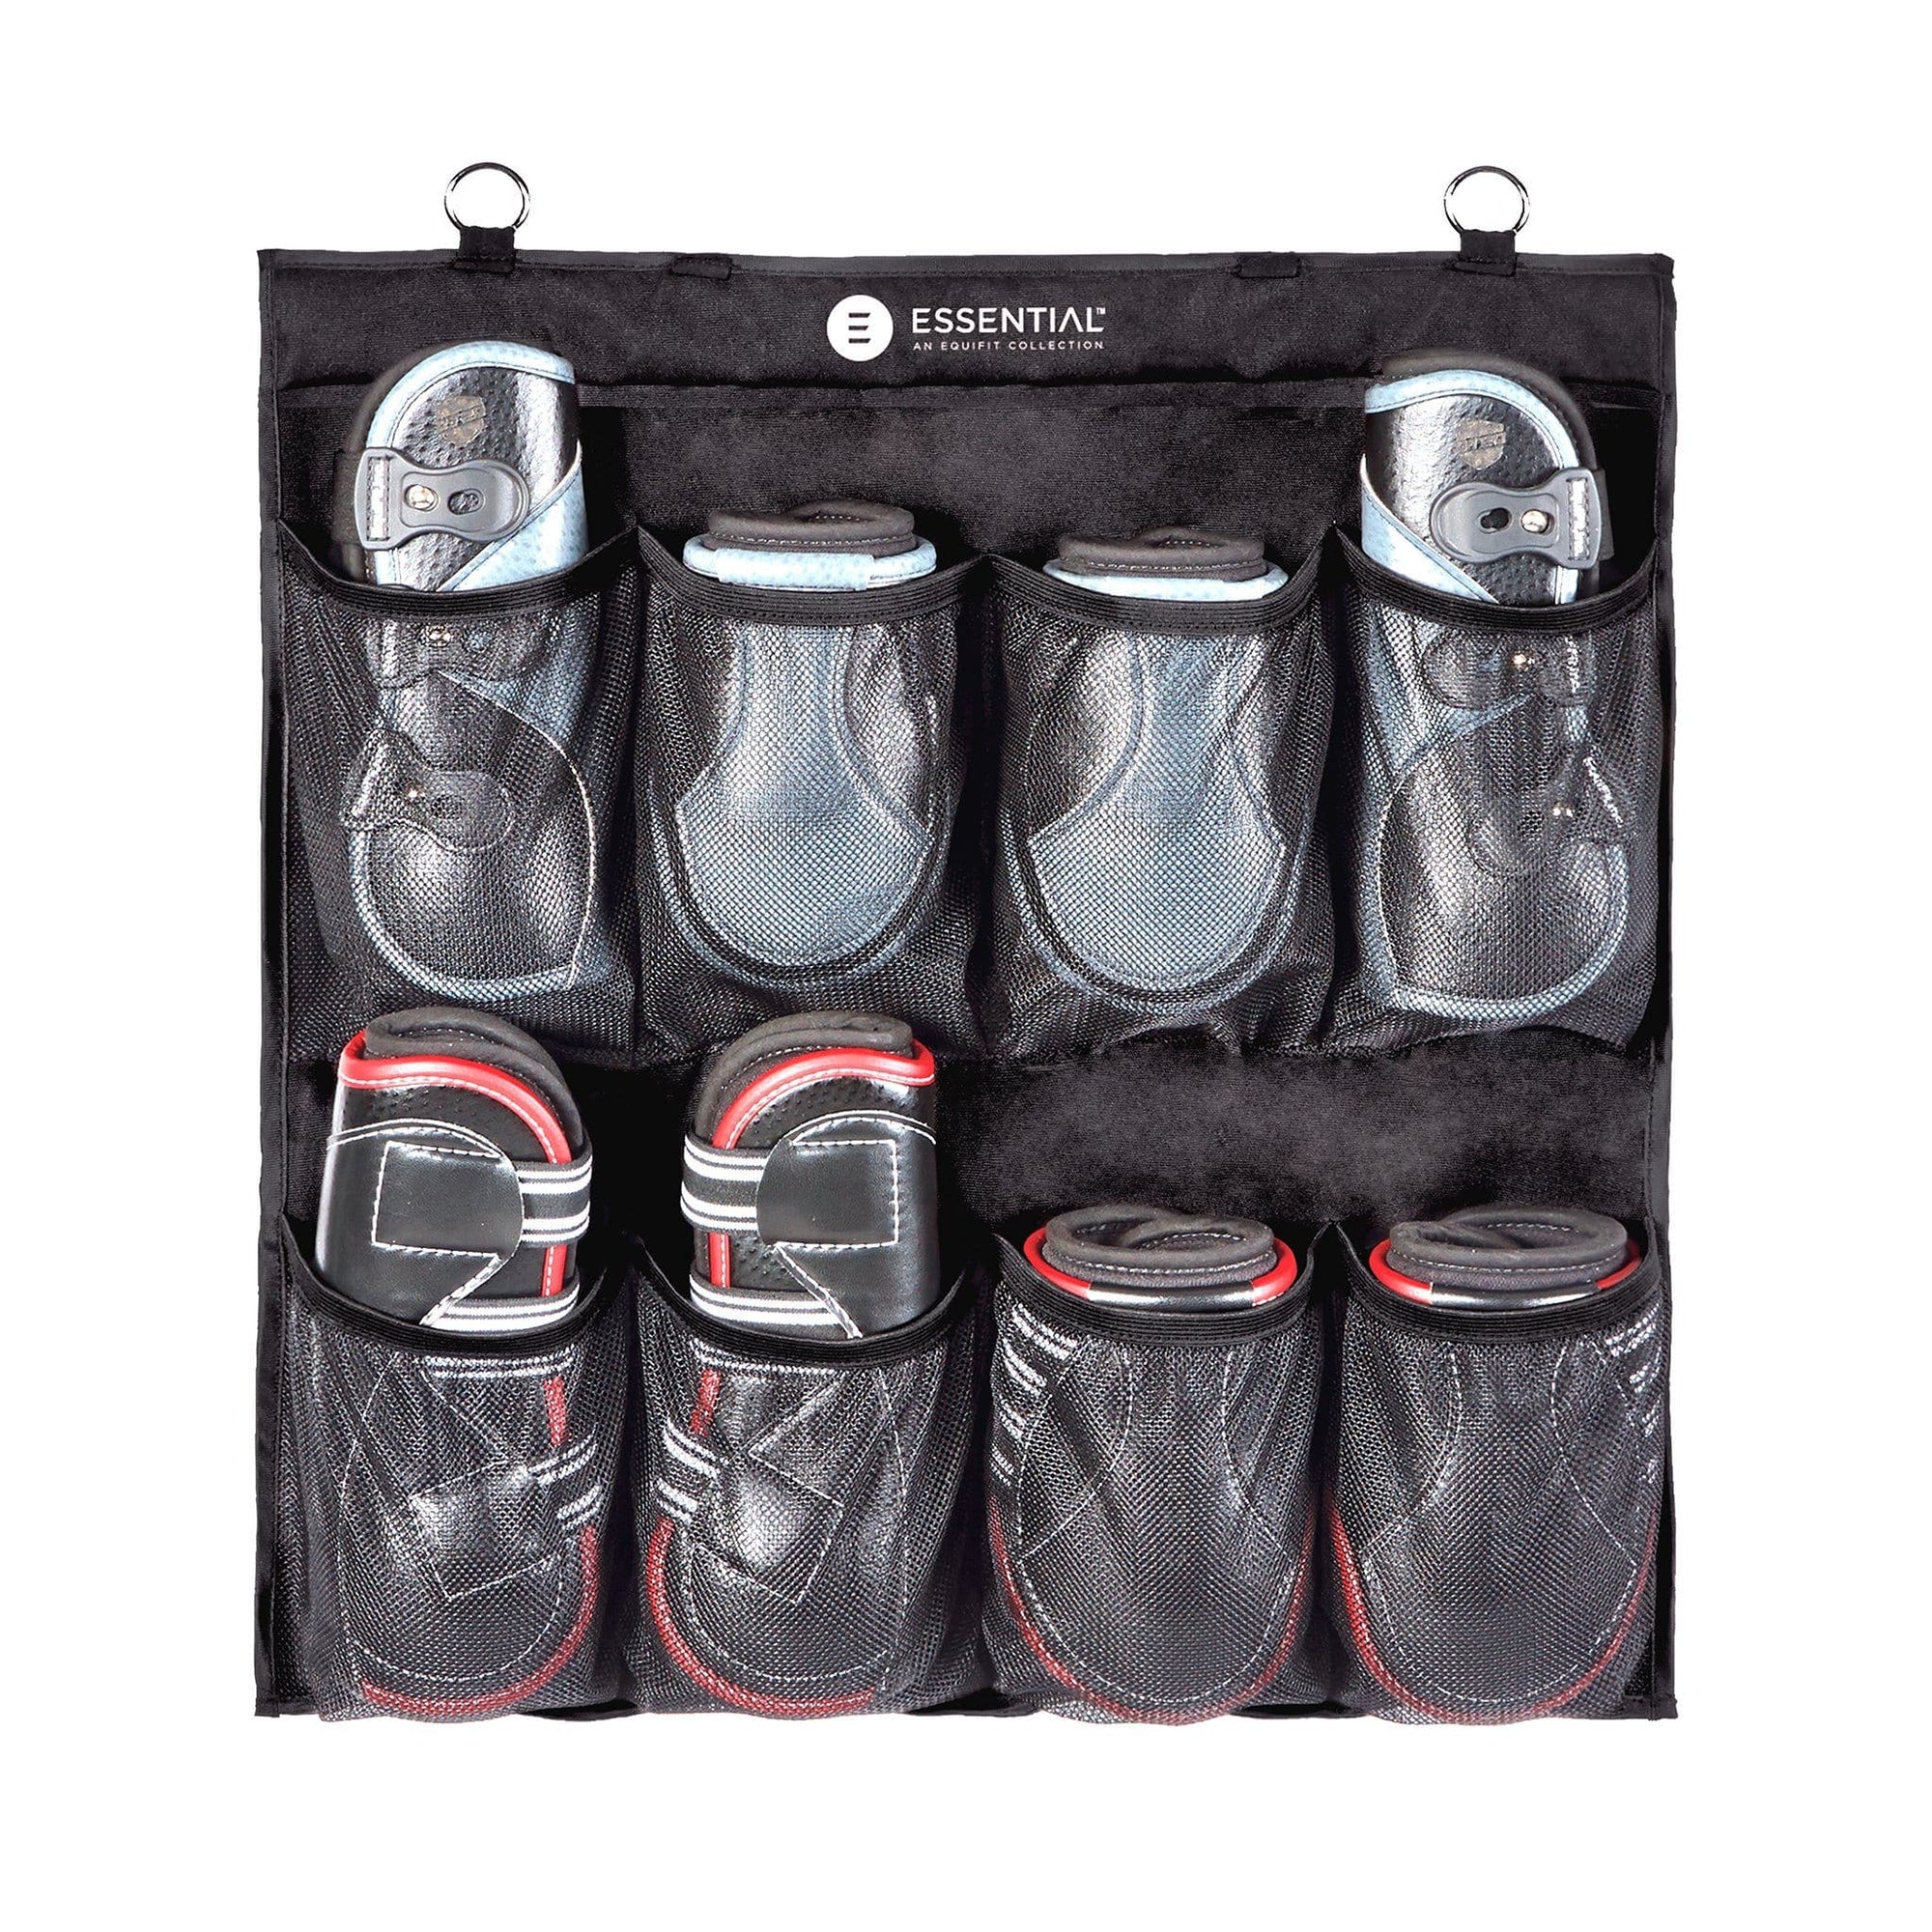 The Essential Hanging Boot Organizer offers convenient storage for all of your horse boots and equipment, at home and on the road. 